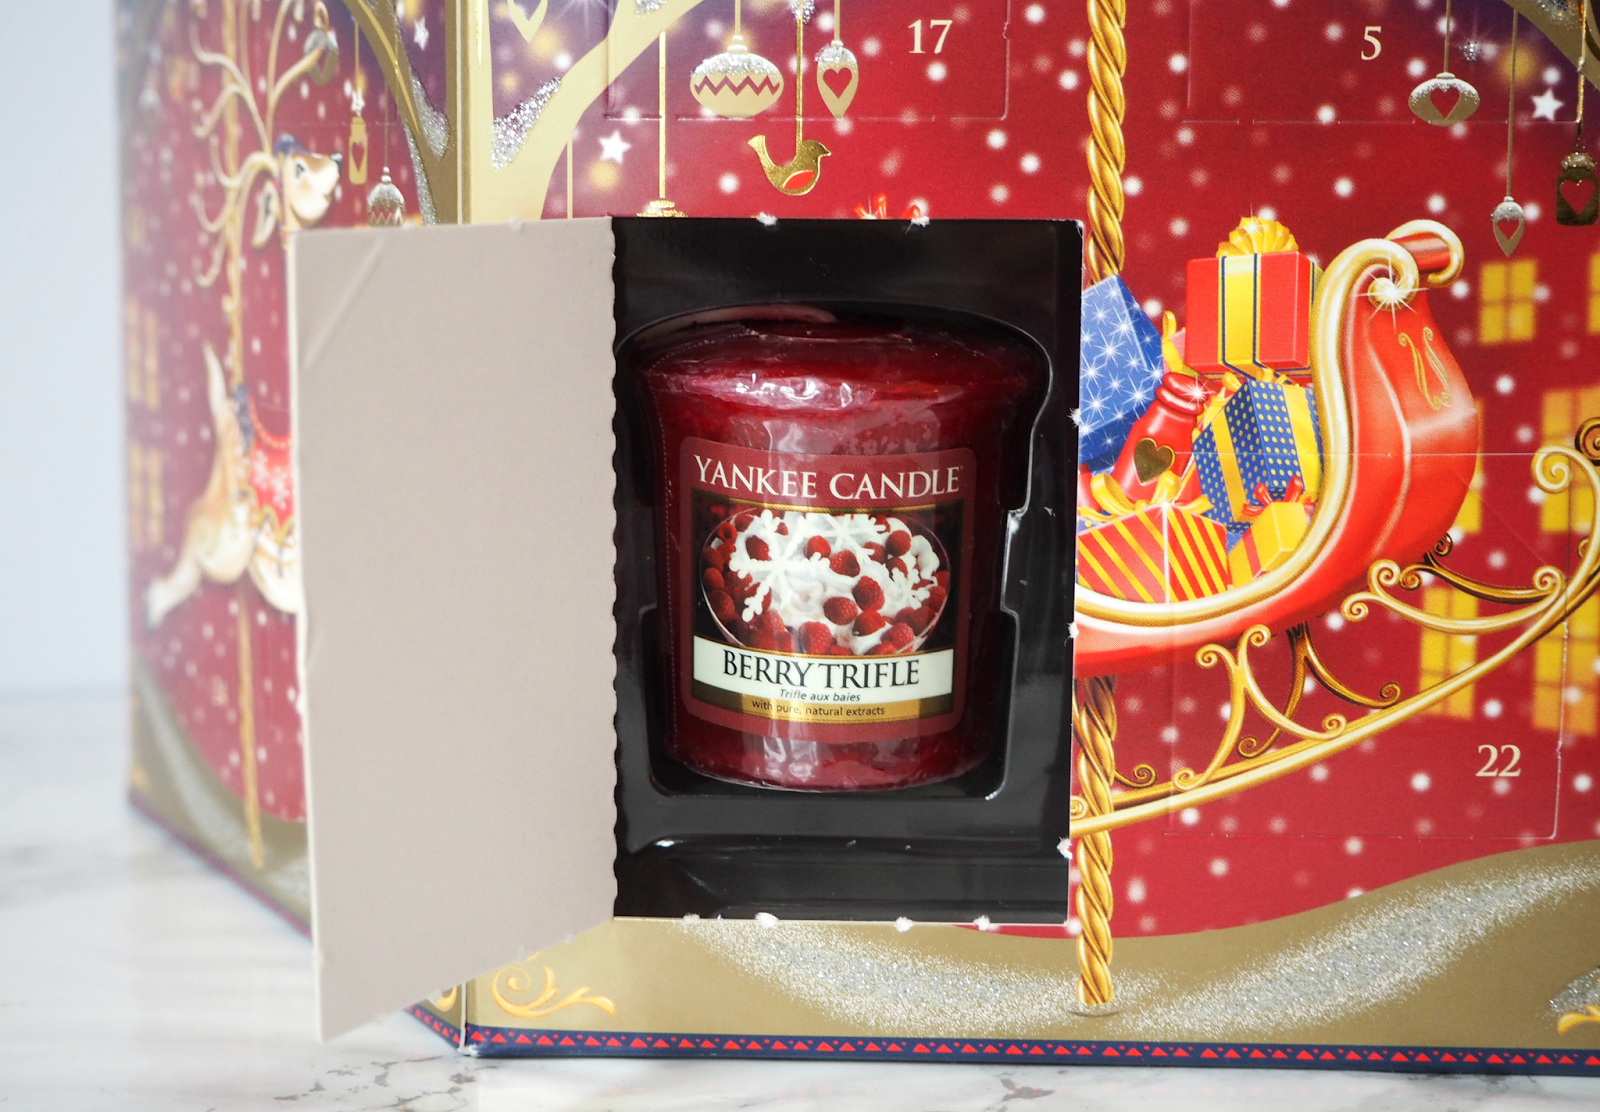 A Sweet Smelling Festive Alternative The Yankee Candle